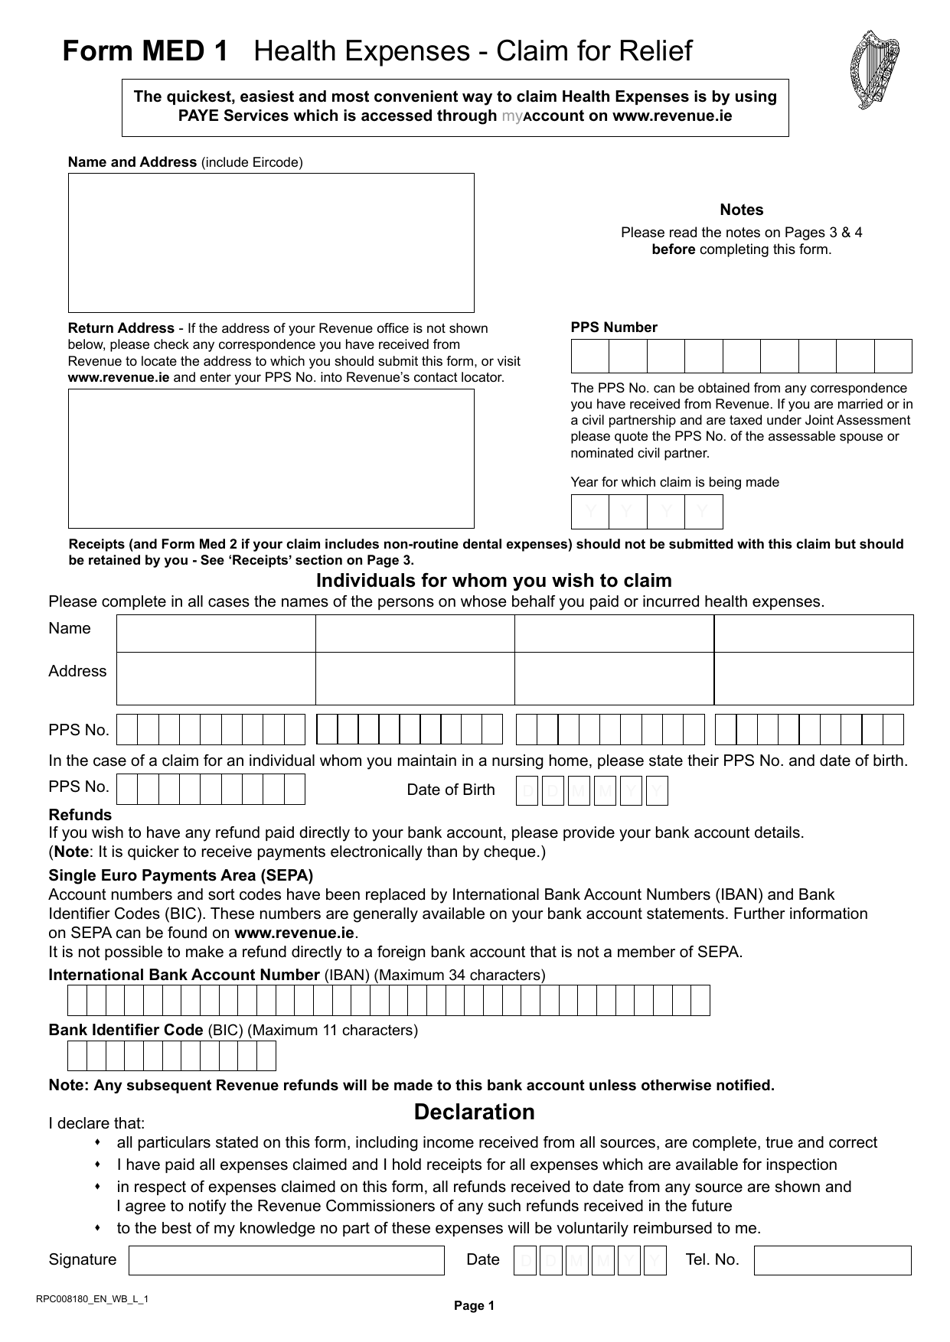 Form MED1 Health Expenses - Claim for Relief - Ireland, Page 1